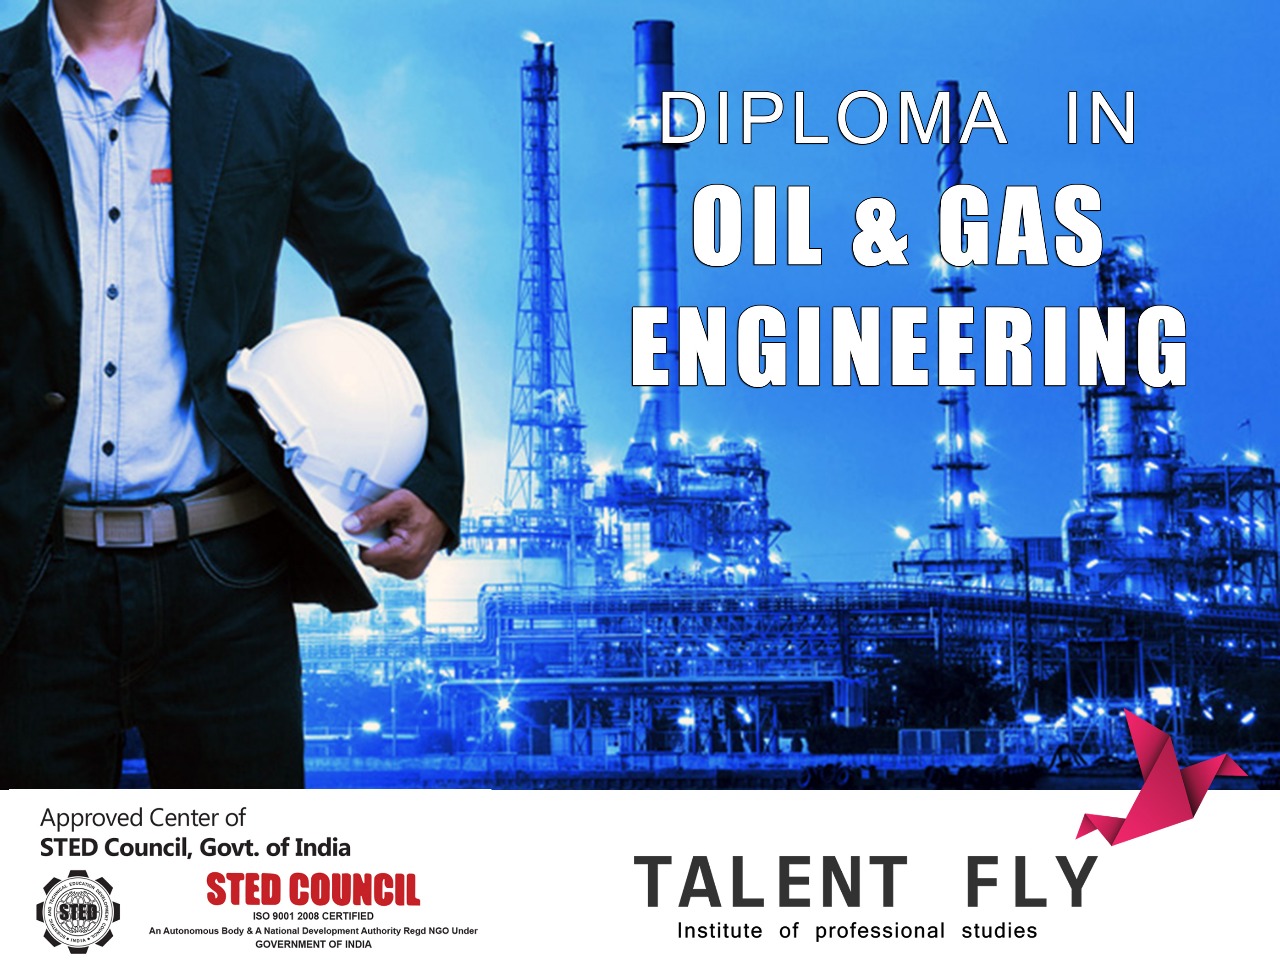 Best Oil & Gas Institutes and Courses in Kerala, Best Oil & Gas Institutes and Courses in Kerala, Cochin, Kerala Kerala, Kochi Kochi, OIL & GAS Training Institute in Kochi, OIL & GAS Training Institute in Kochi, Oil & Gas Training Institute Kochi, Oil & Gas Training Institute Kochi, Oil and Gas course in kochi, Oil and gas training in kochi, Oil and Gas course in kochi, Oil and gas training in kochiRemove term: Oil and Gas courses Ernakulam, Oil and Gas courses Ernakulam, Oil and Gas Institution in Cochin, Oil and Gas Institution in Cochin, oil and gas courses in ernakulam, oil and gas courses in ernakulam, oil and gas course in kerala, oil and gas course in kerala